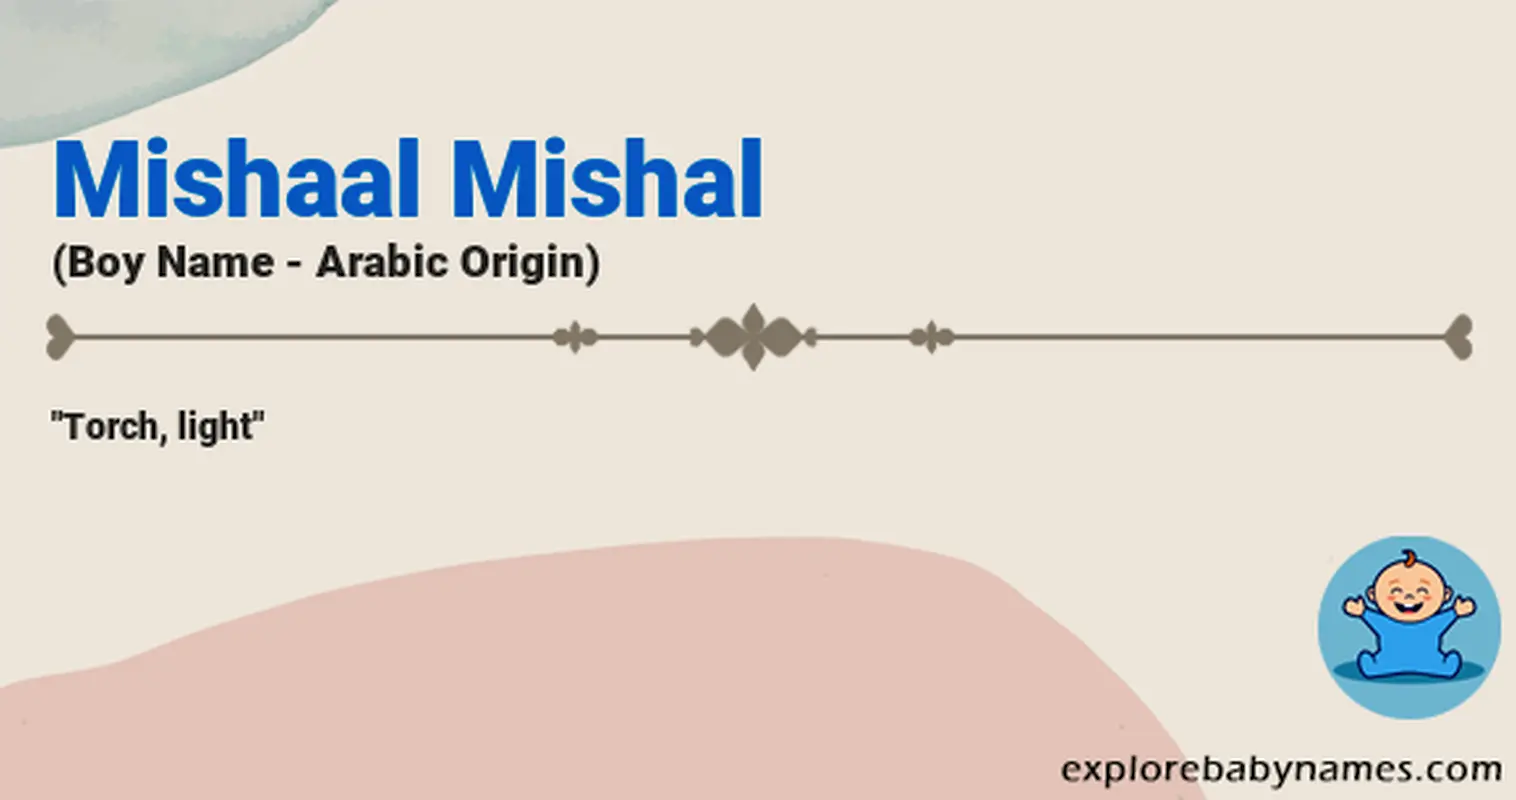 Meaning of Mishaal Mishal